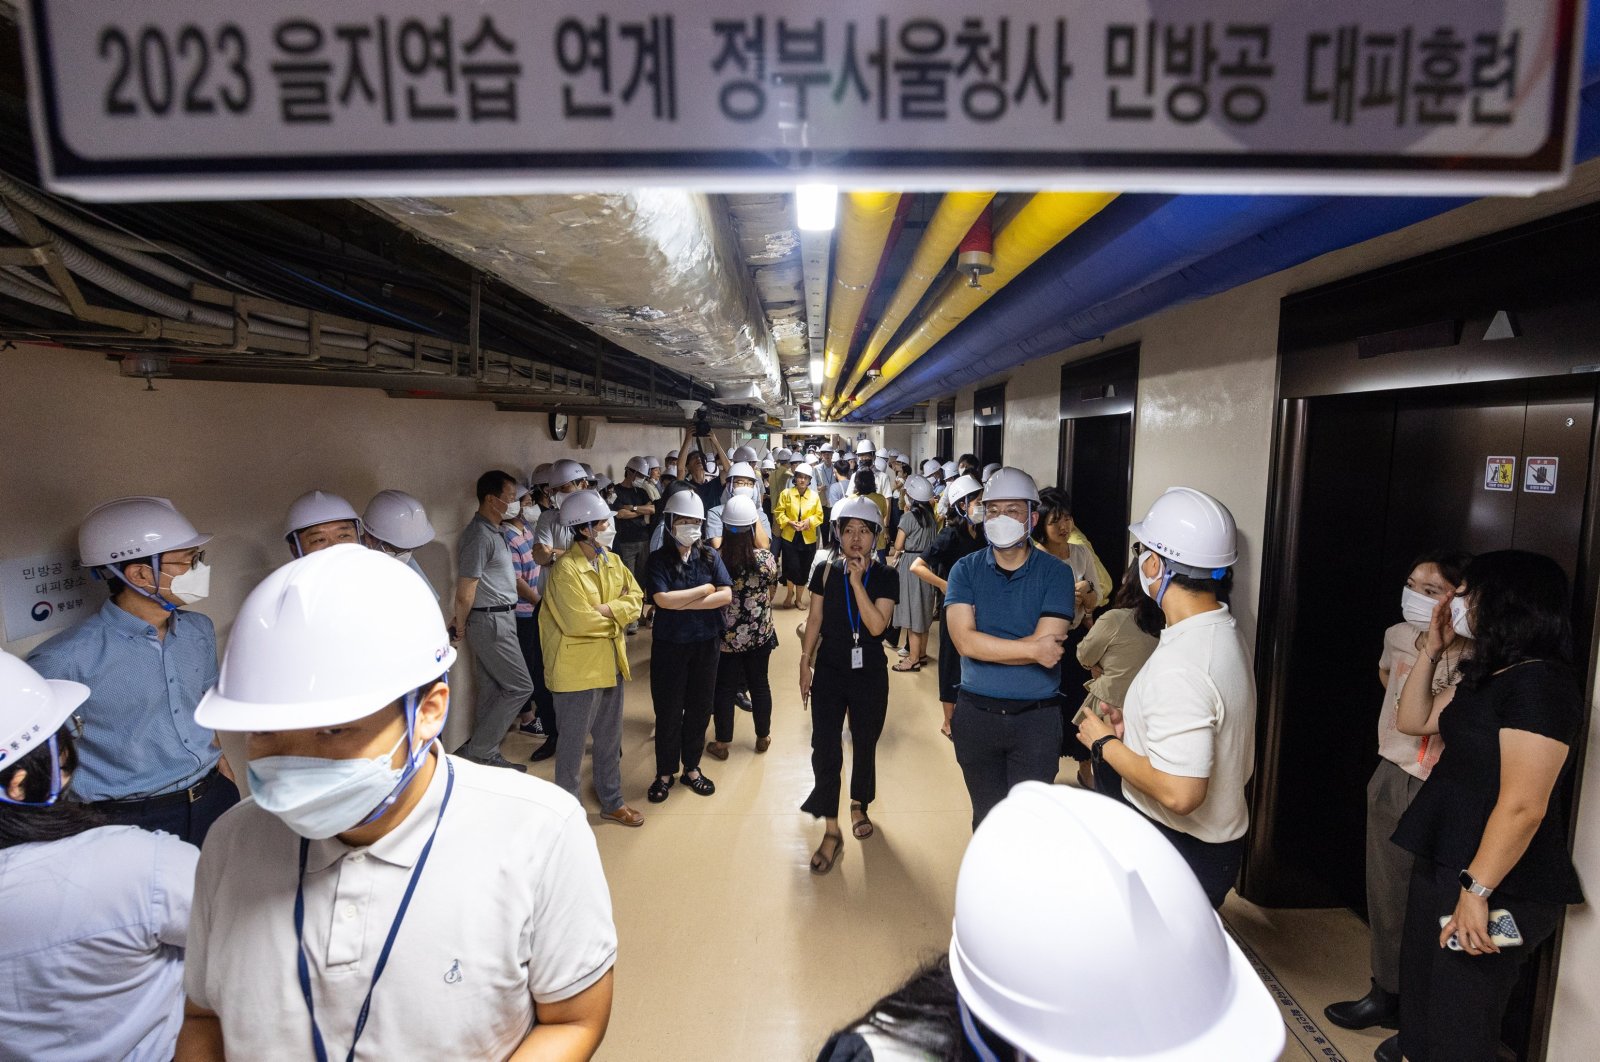 Government officials shelter at the government complex after a civil defense siren went off across the country with vehicles on designated roads to be ordered to pull over and people to evacuate to shelters or underground facilities, Seoul, South Korea, Aug. 23, 2023. (EPA Photo)